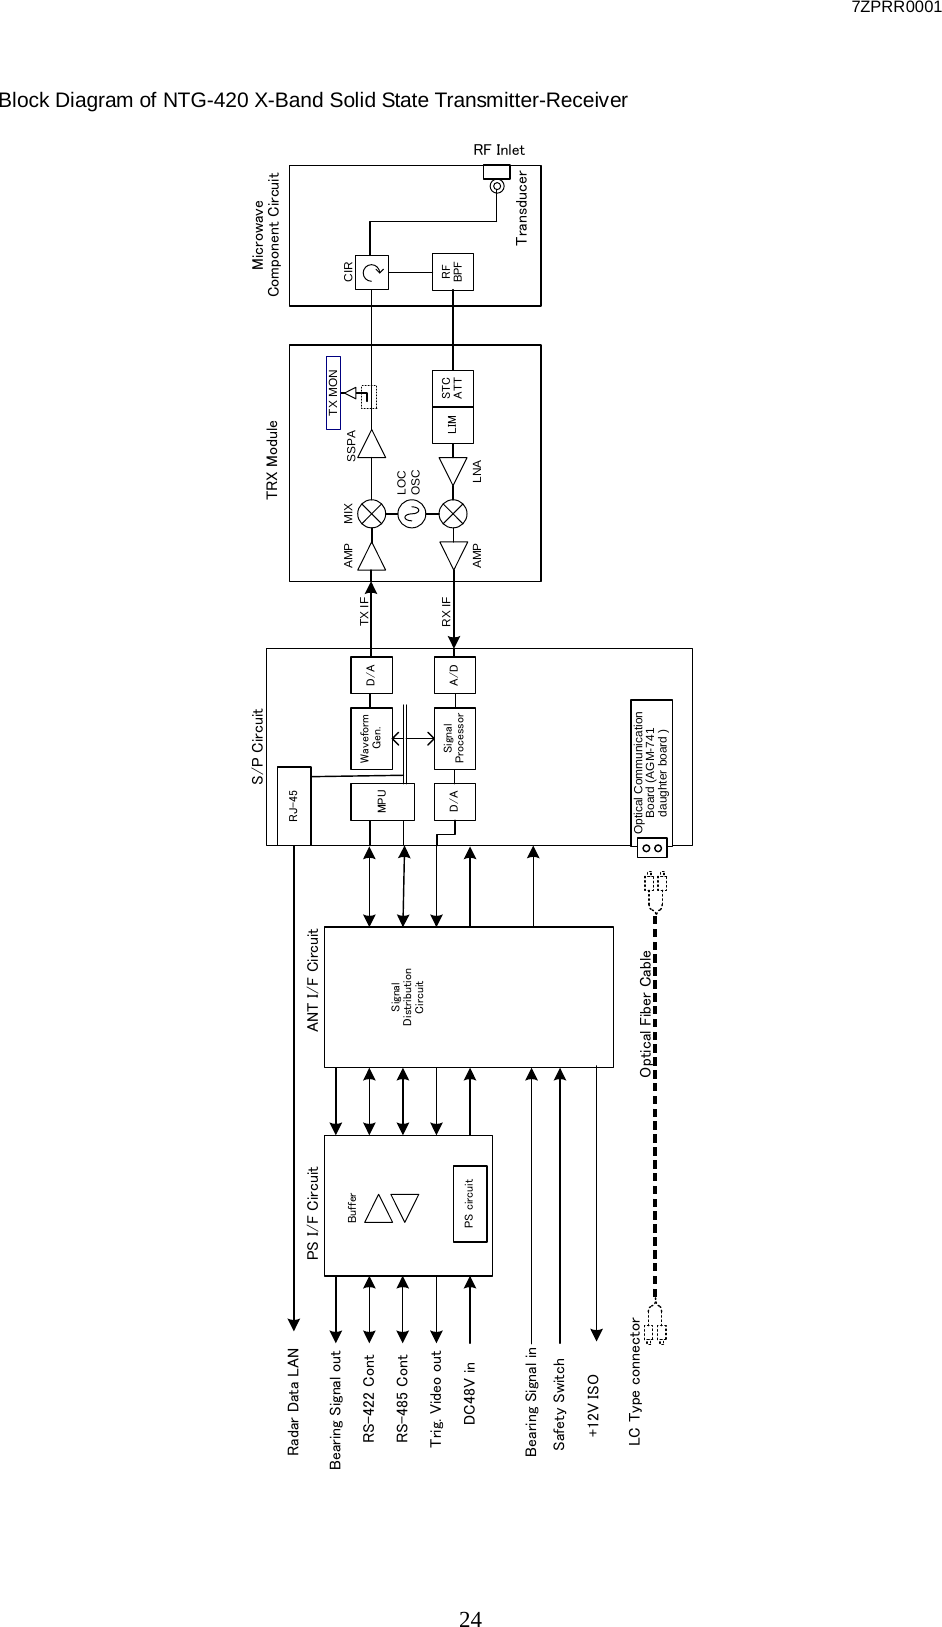 7ZPRR0001  24 Block Diagram of NTG-420 X-Band Solid State Transmitter-Receiver  PS I/F CircuitBearing Signal outRS-422 ContTrig. Video outRS-485 ContDC48V inANT I/F CircuitBearing Signal inSafety SwitchPS circuitBufferSignalDistributionCircuitRadar Data LAN+12V ISOOptical Fiber CableS/P CircuitTRX ModuleMPUWaveformGen. D/AA/DSignalProcessorD/AMIXLOCOSCLIM STCATTTX MONCIRRFBPFSSPALNAAMPAMPRX IFTX IFRJ-45Microwave Component CircuitRF InletTransducerOptical Communication Board (AGM-741 daughter board )LC Type connector 